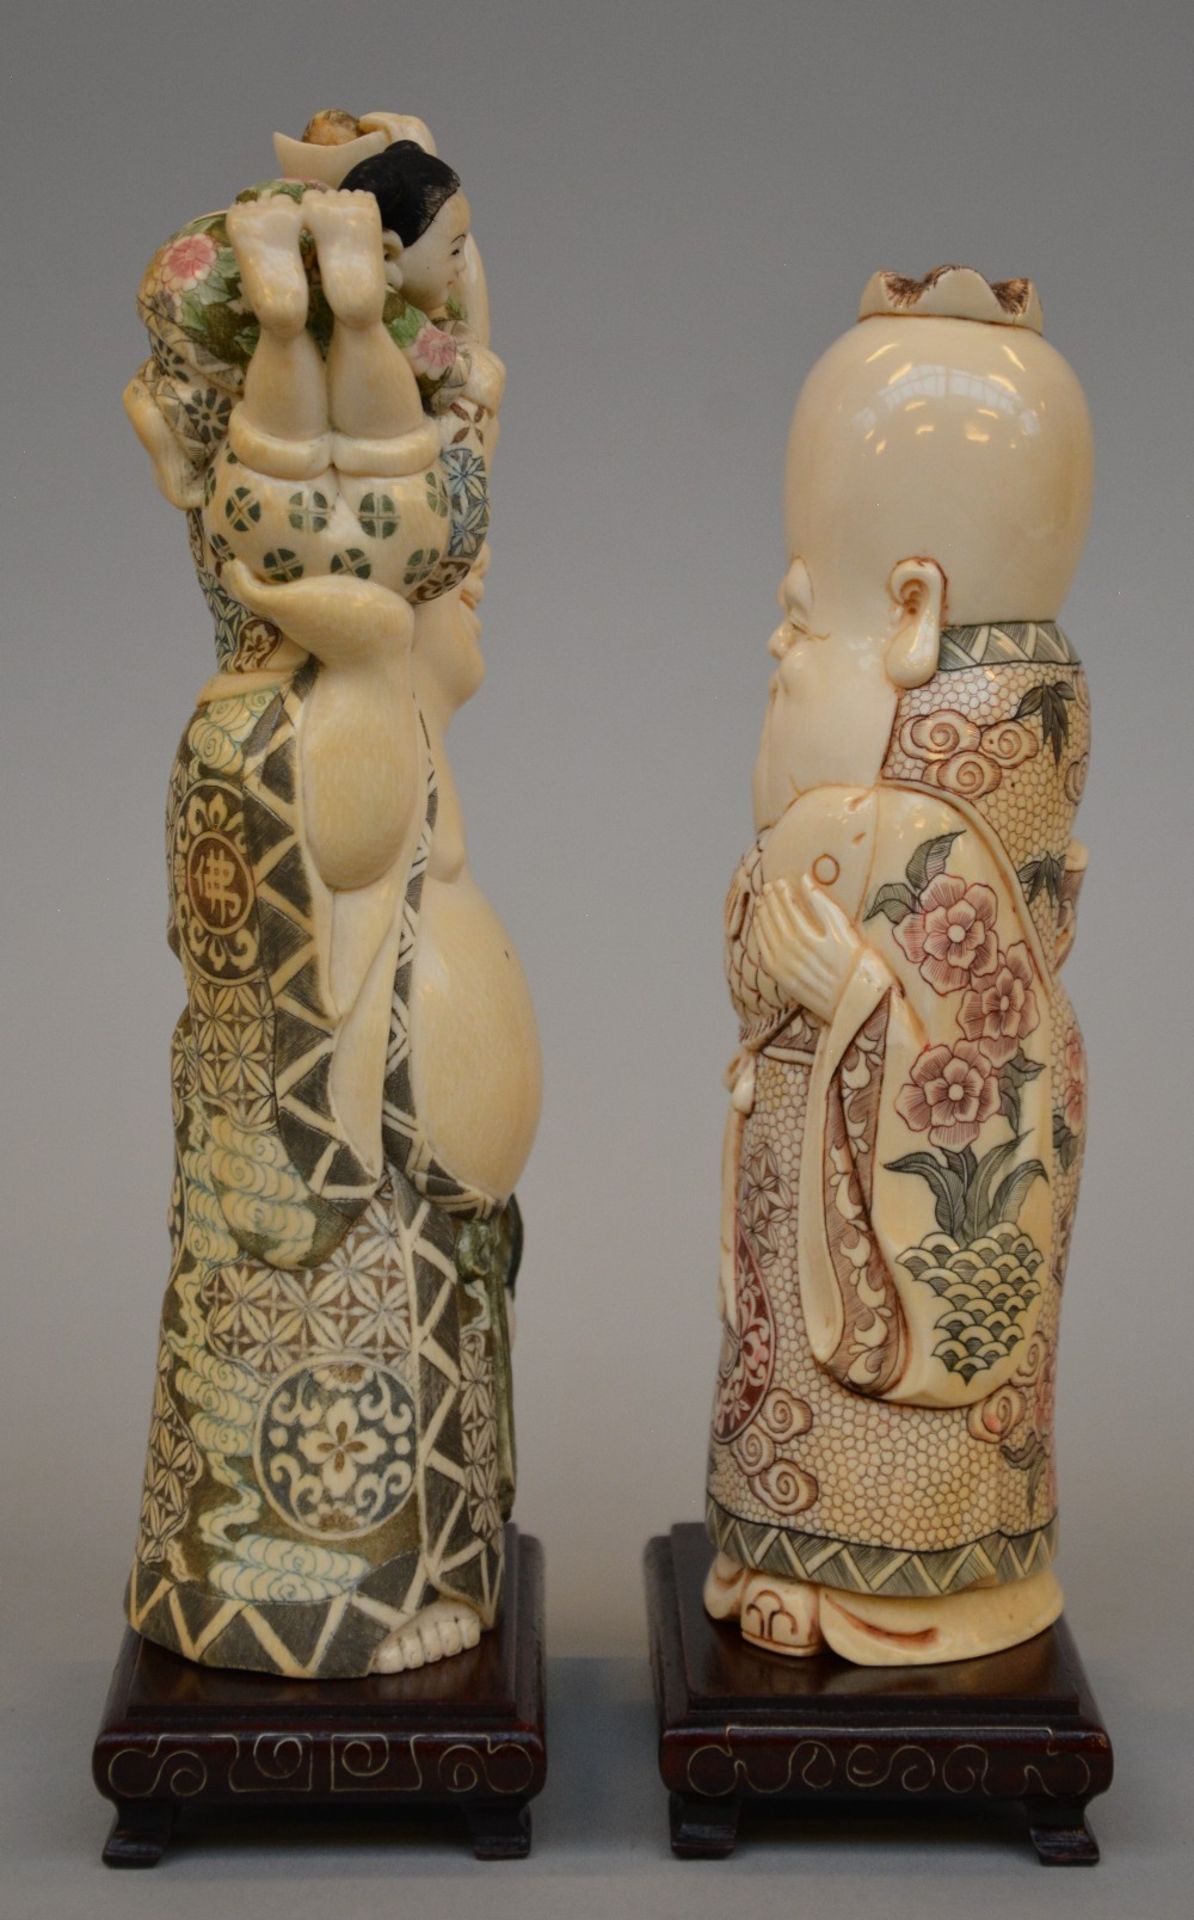 Two Japanese ivory figures on a wooden base depicting the laughing Hotei and Fukurokuju, scrimshaw - Image 2 of 6